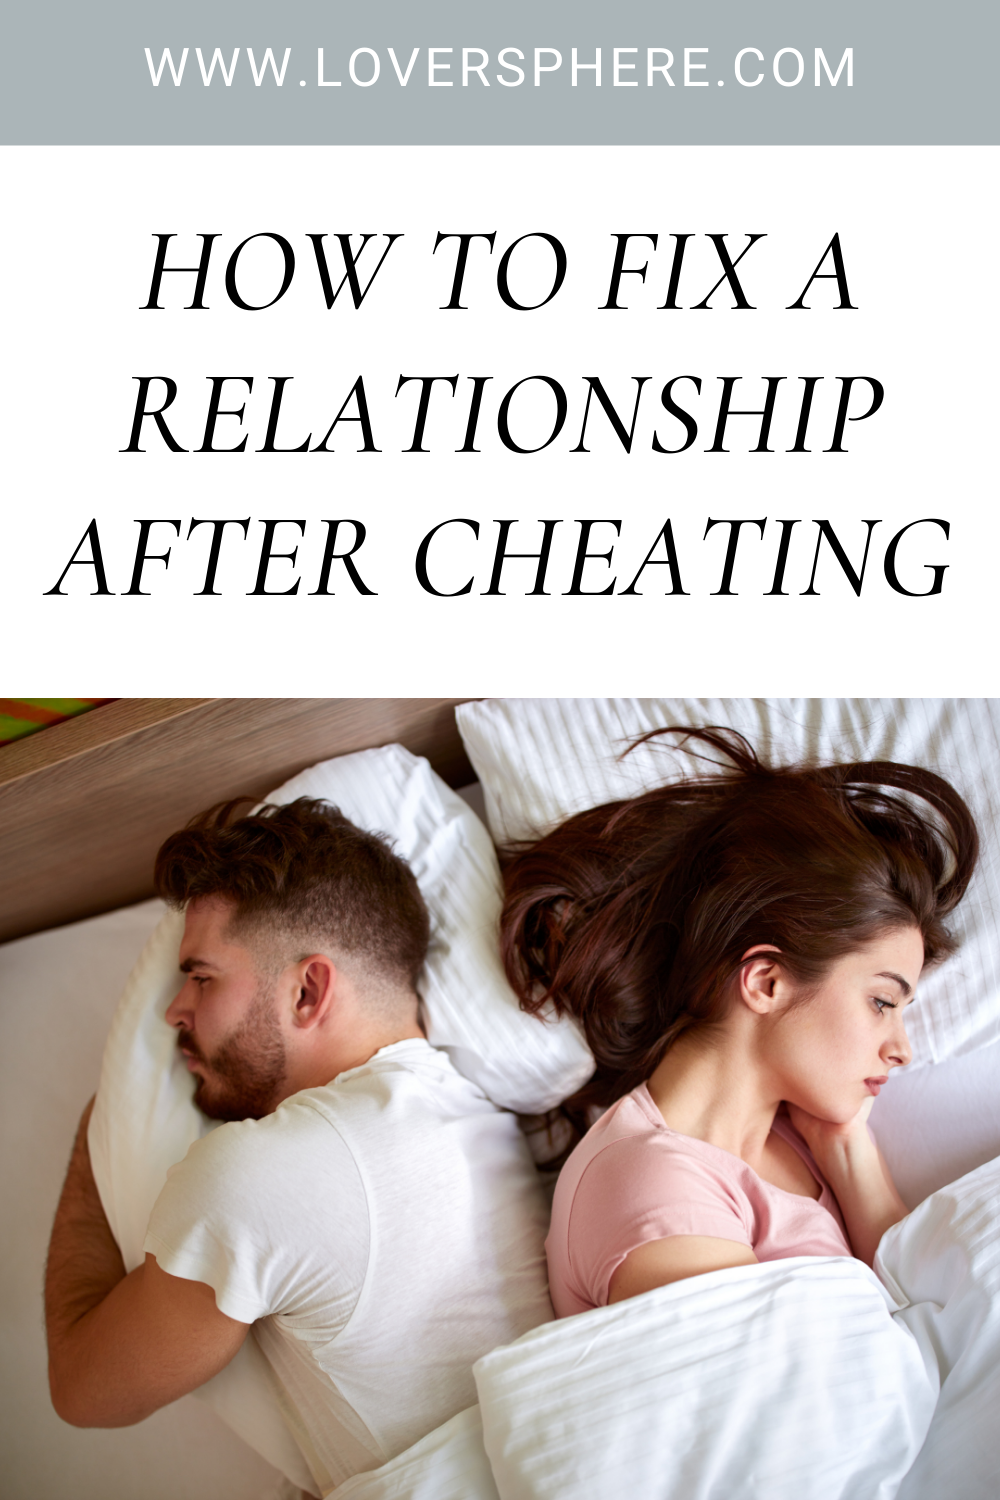 How To Fix A Relationship After Cheating